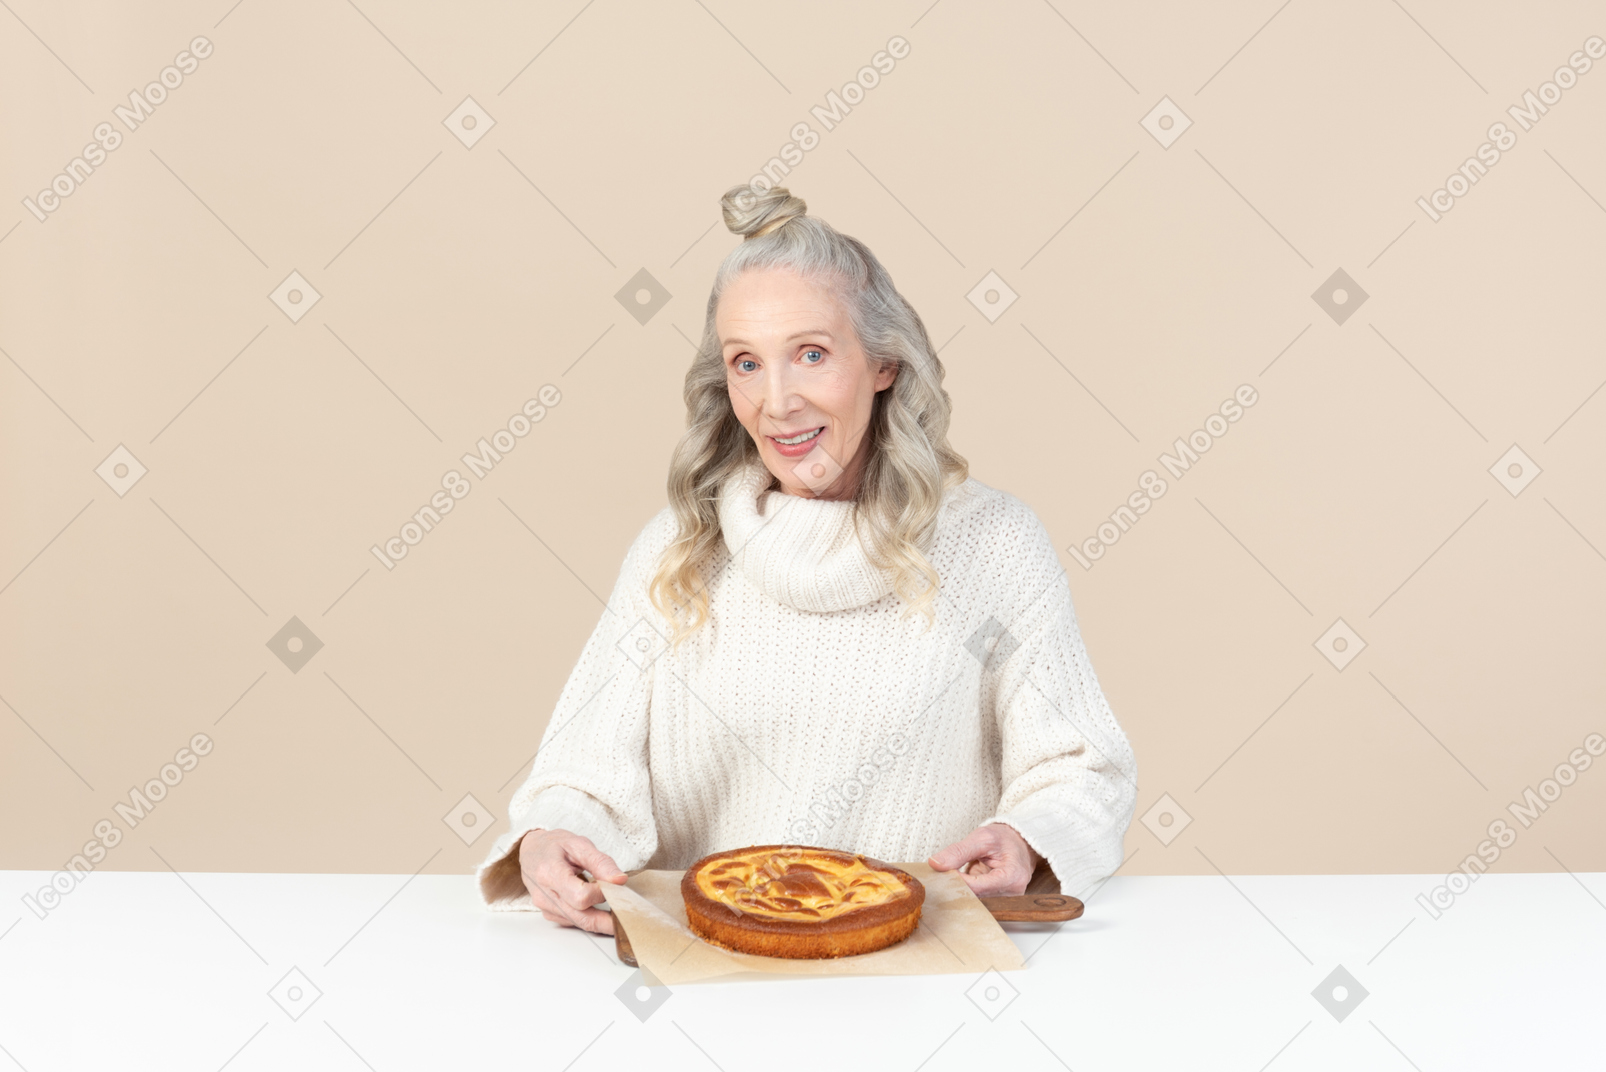 Elegant old woman pleased with a freshly baked pie